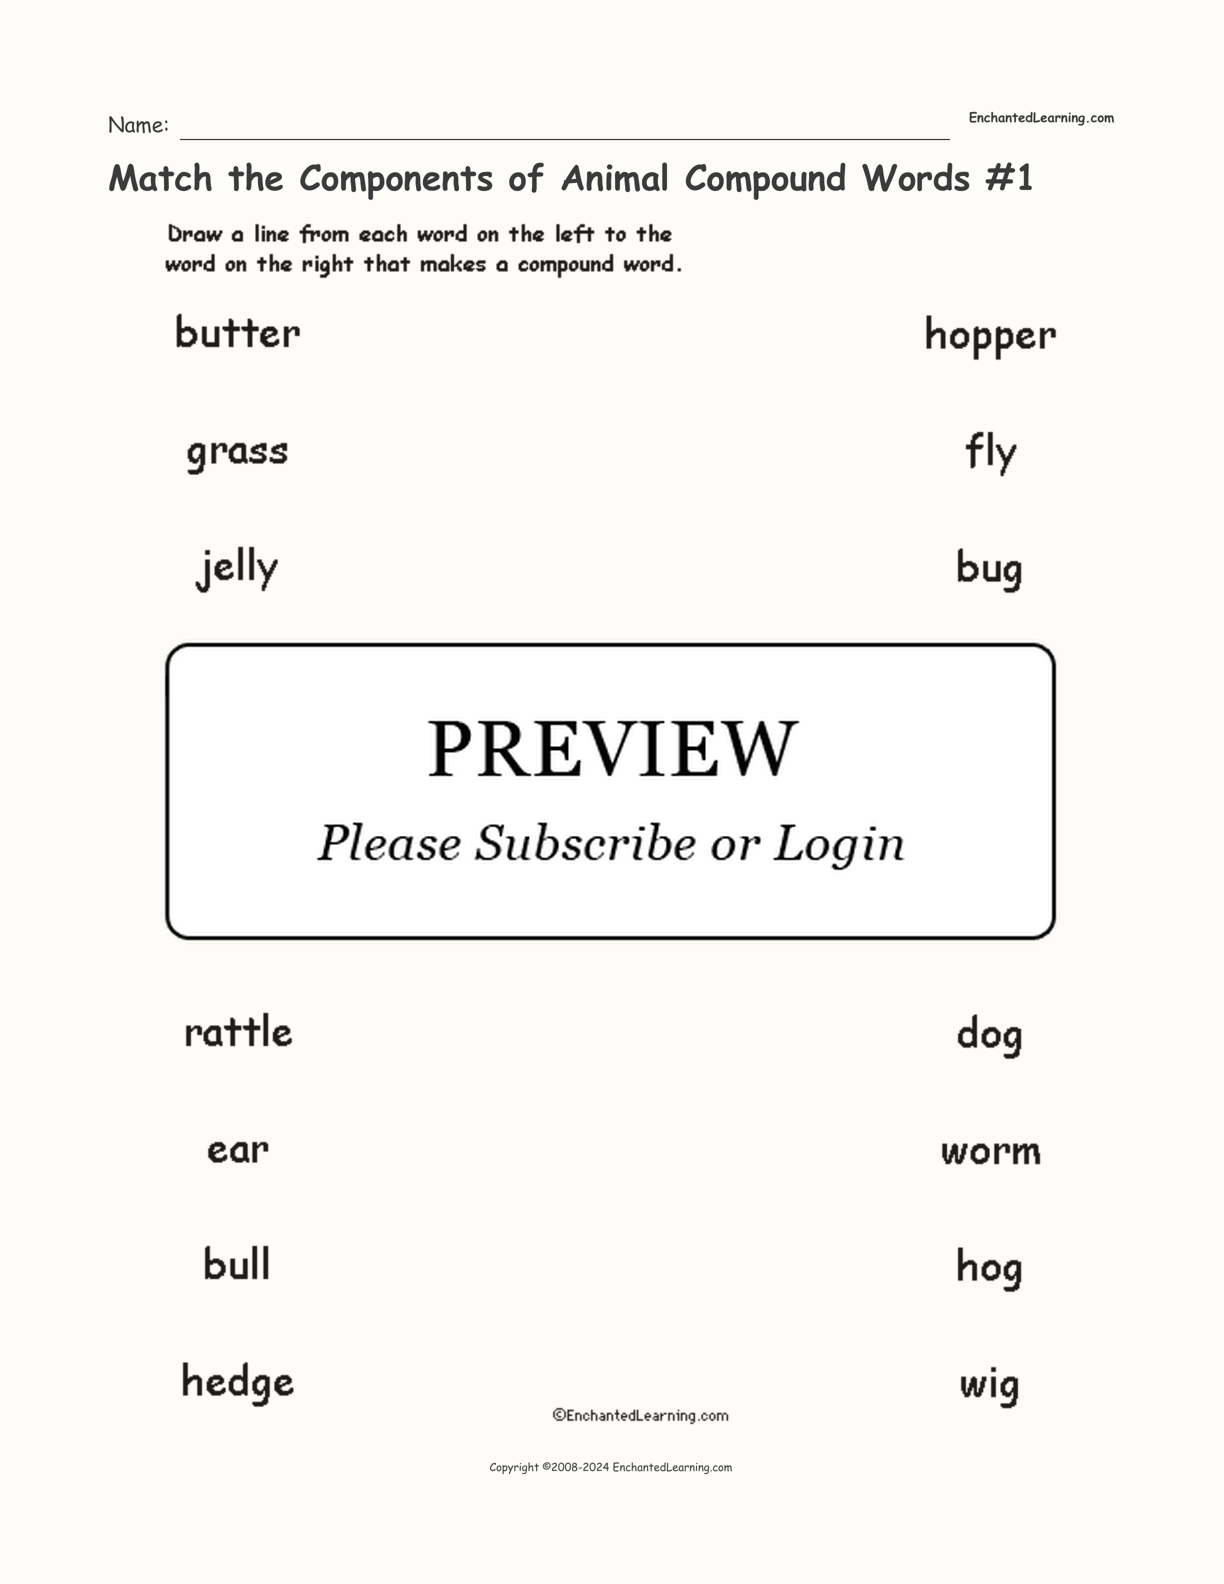 Match the Components of Animal Compound Words #1 interactive worksheet page 1